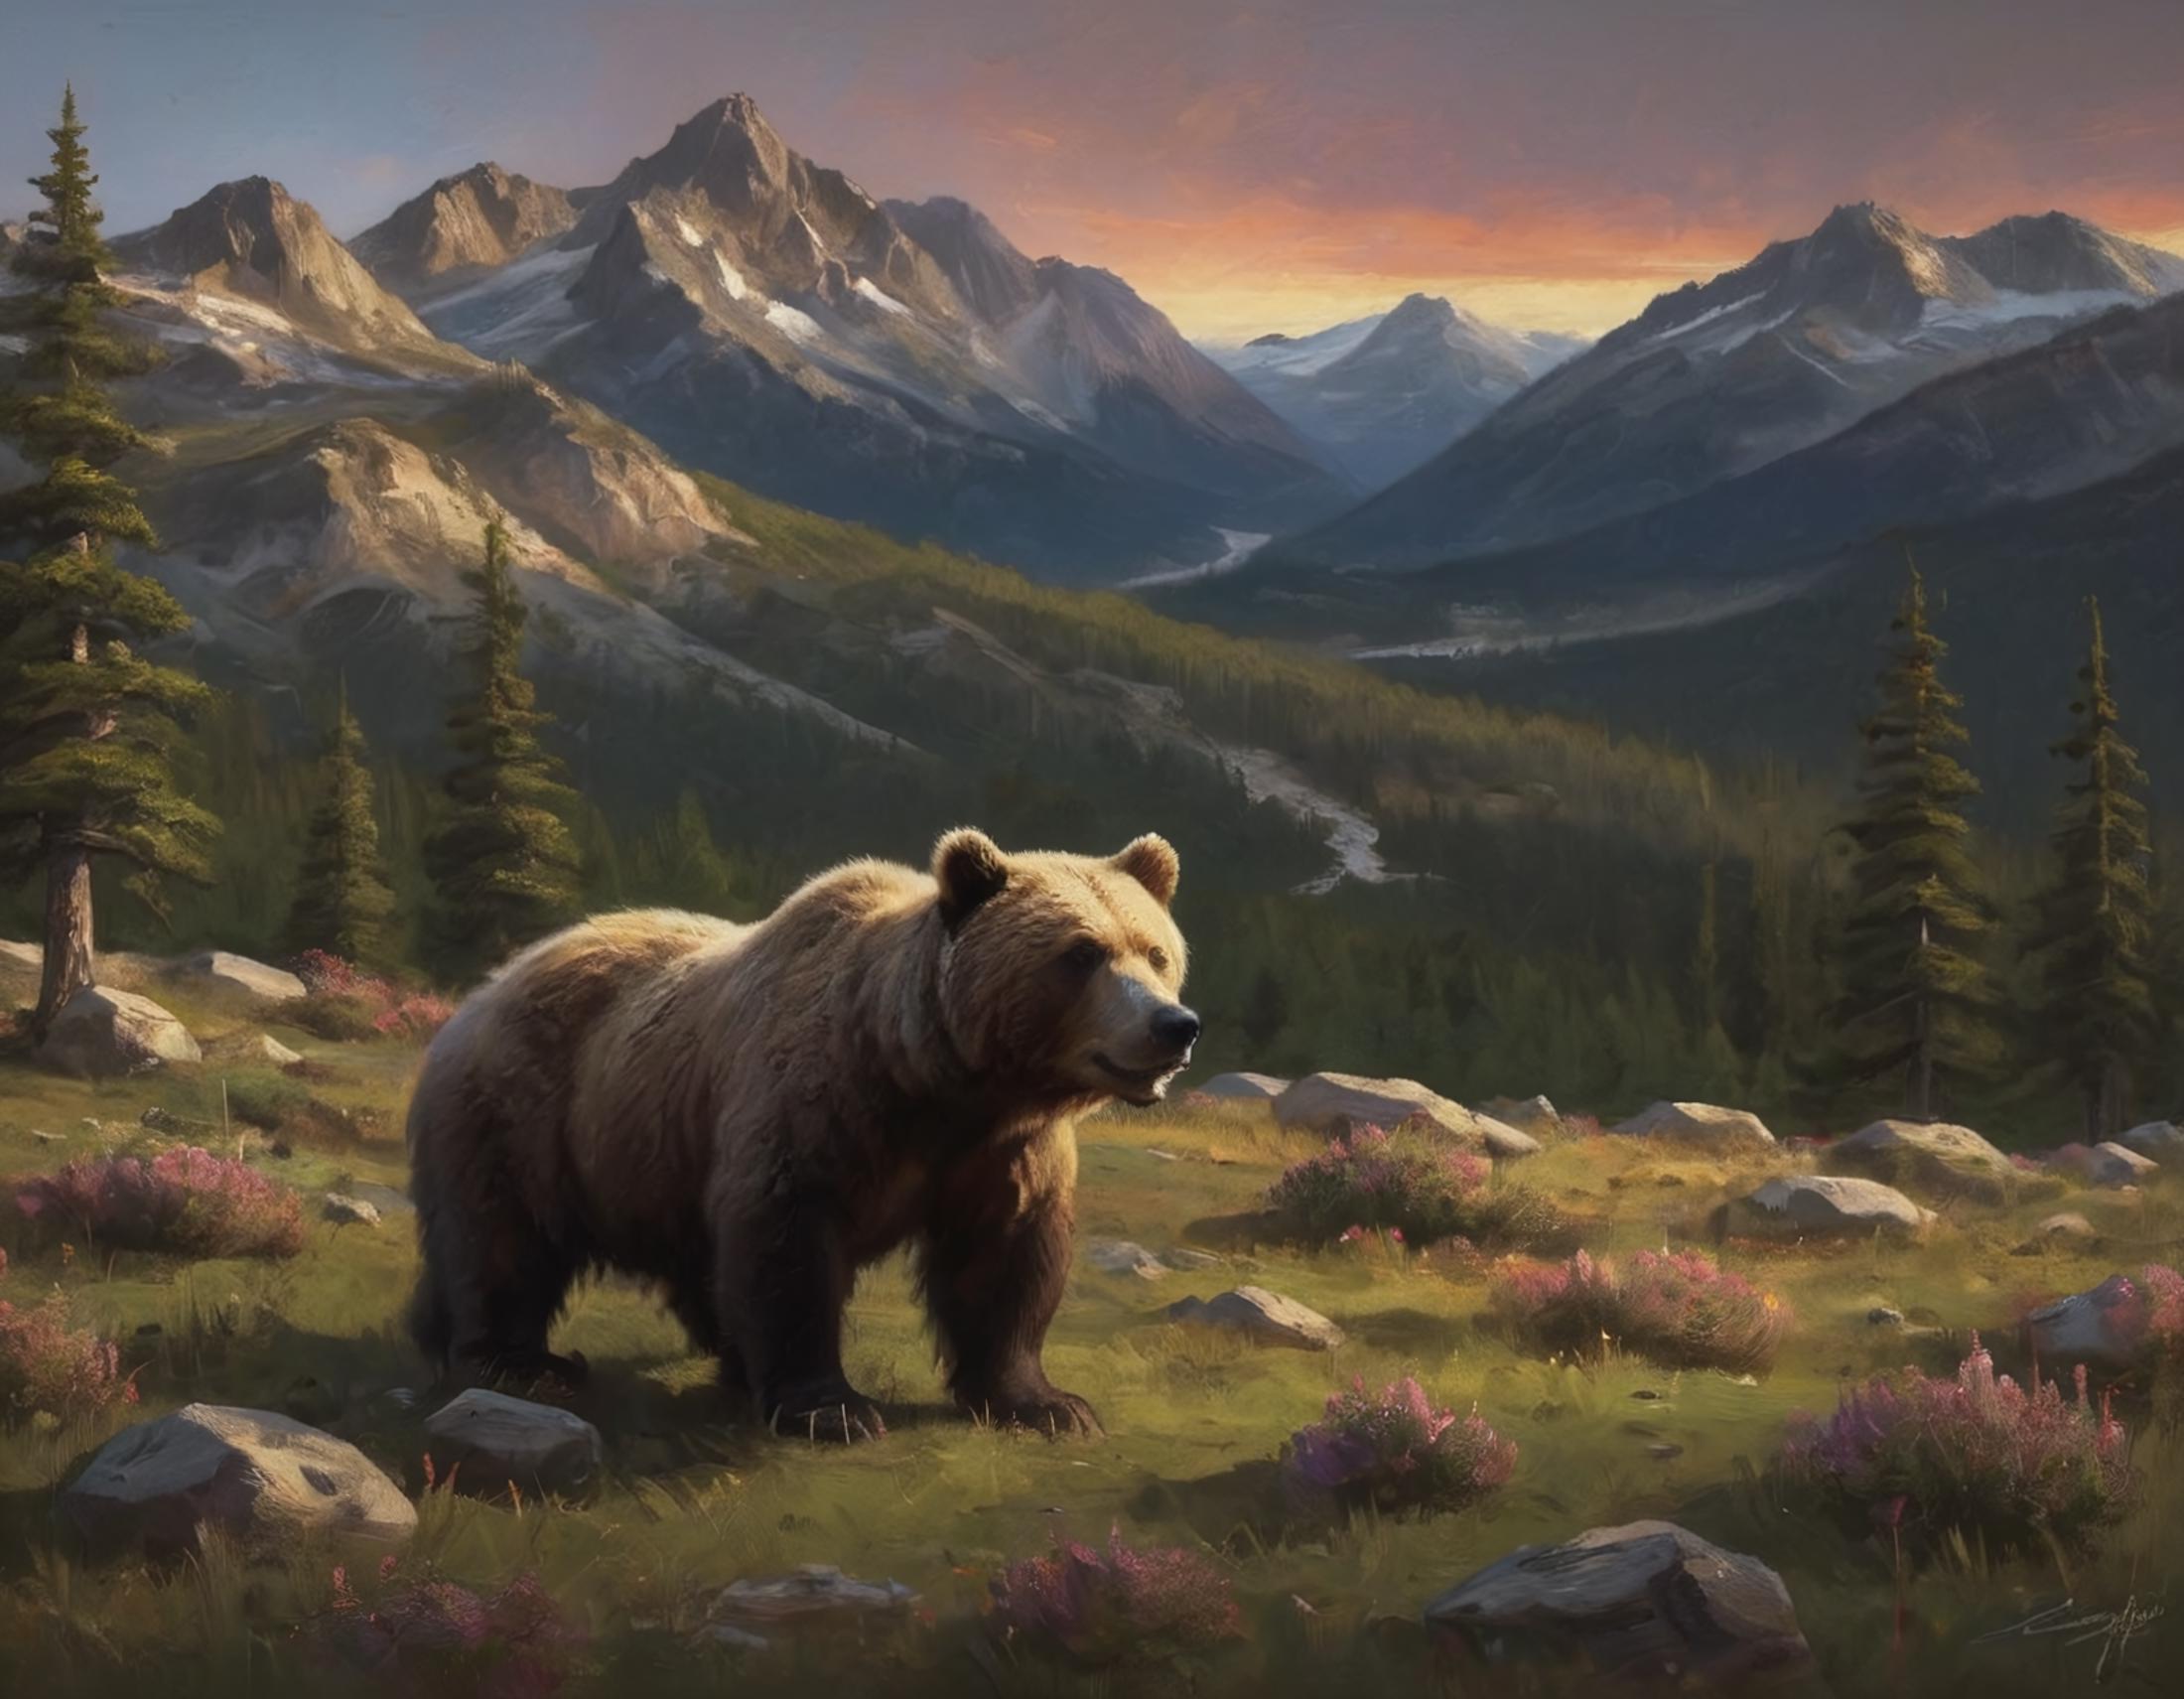 A large brown bear standing in a grassy field with mountains in the background.